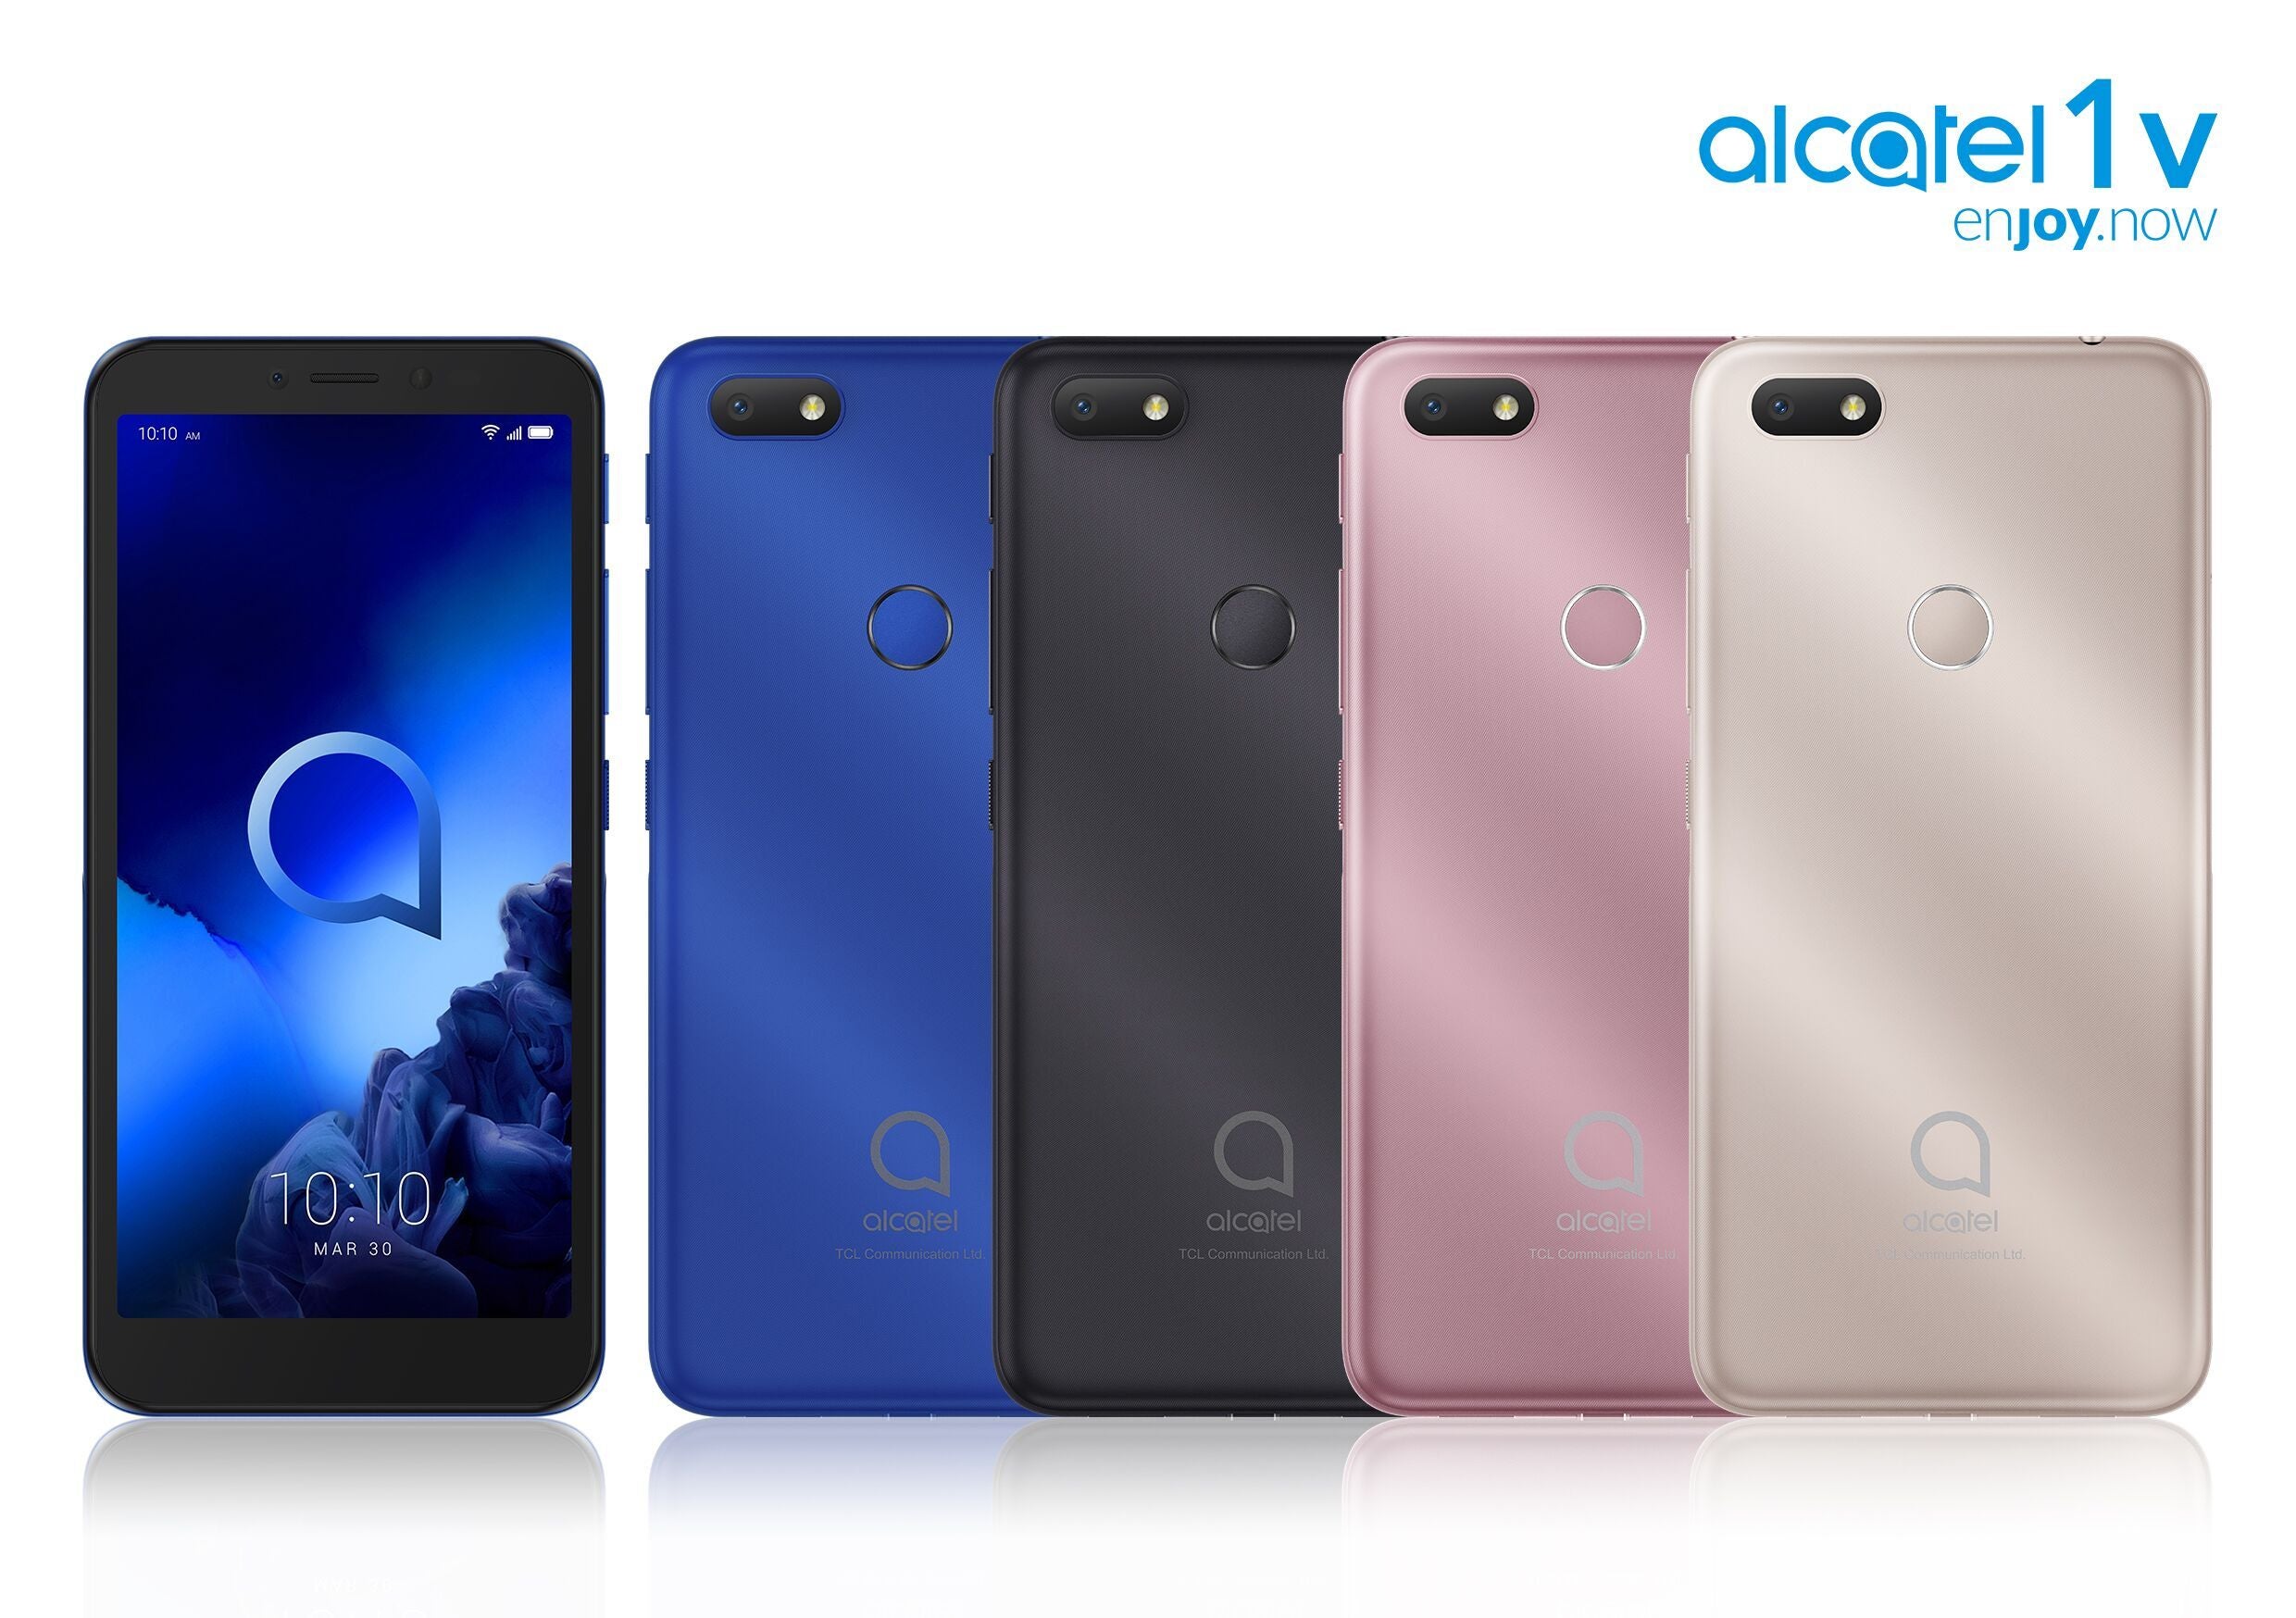 TCL presents two new budget smartphones: the Alcatel 3X and the Alcatel 1V